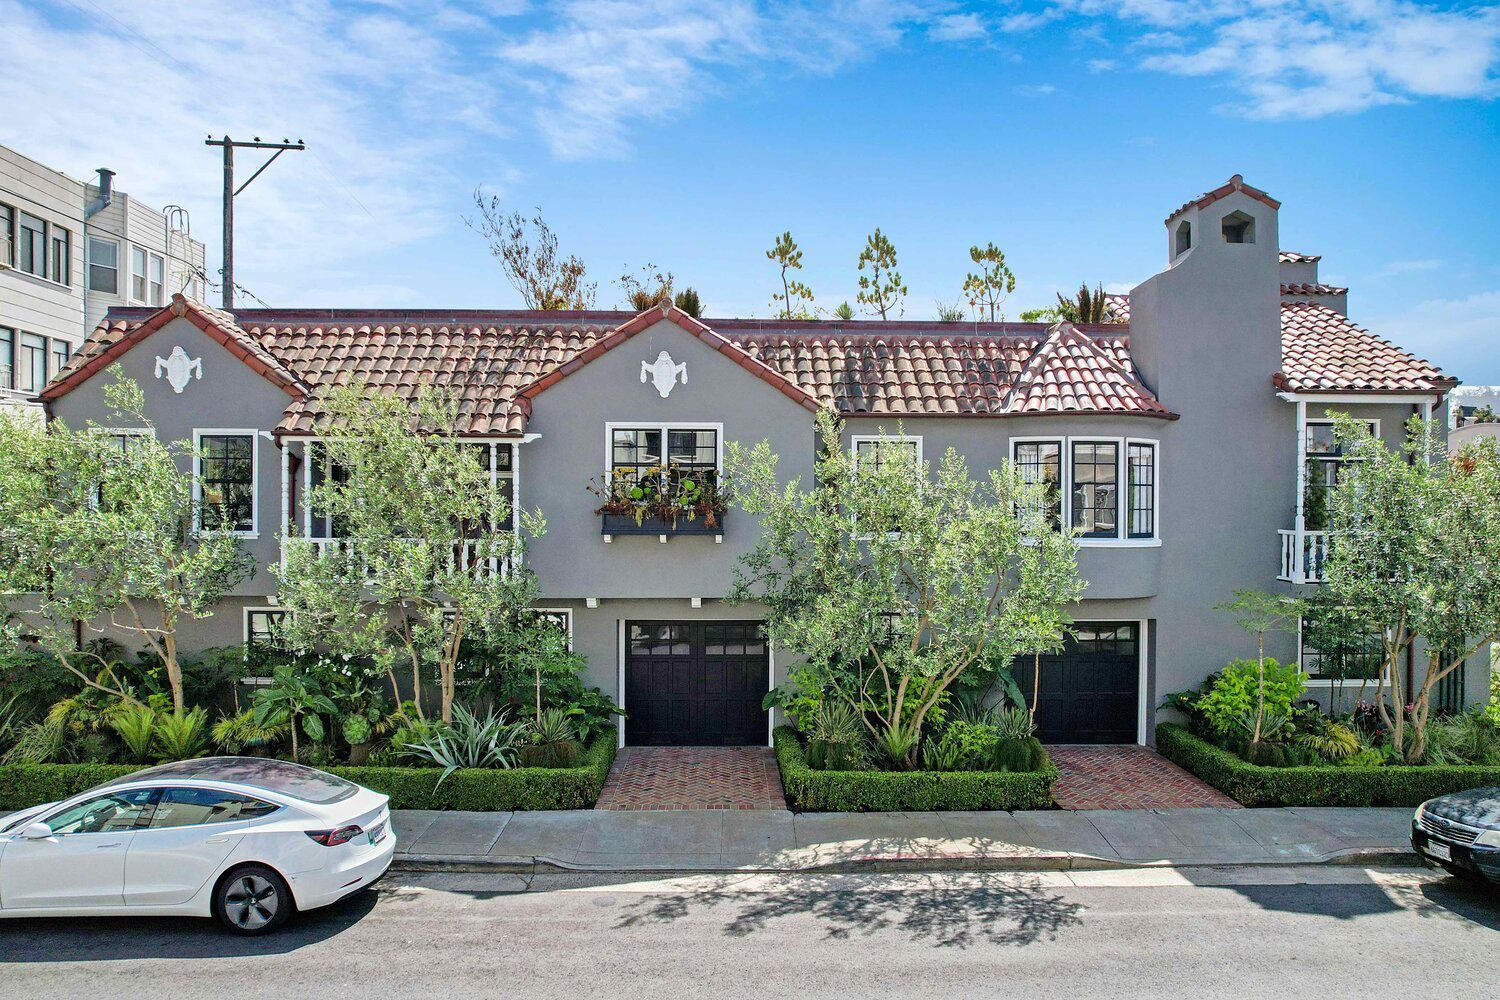 Video House Tour: Mediterranean-style home with charming gardens in the Marina asks $6.2 million